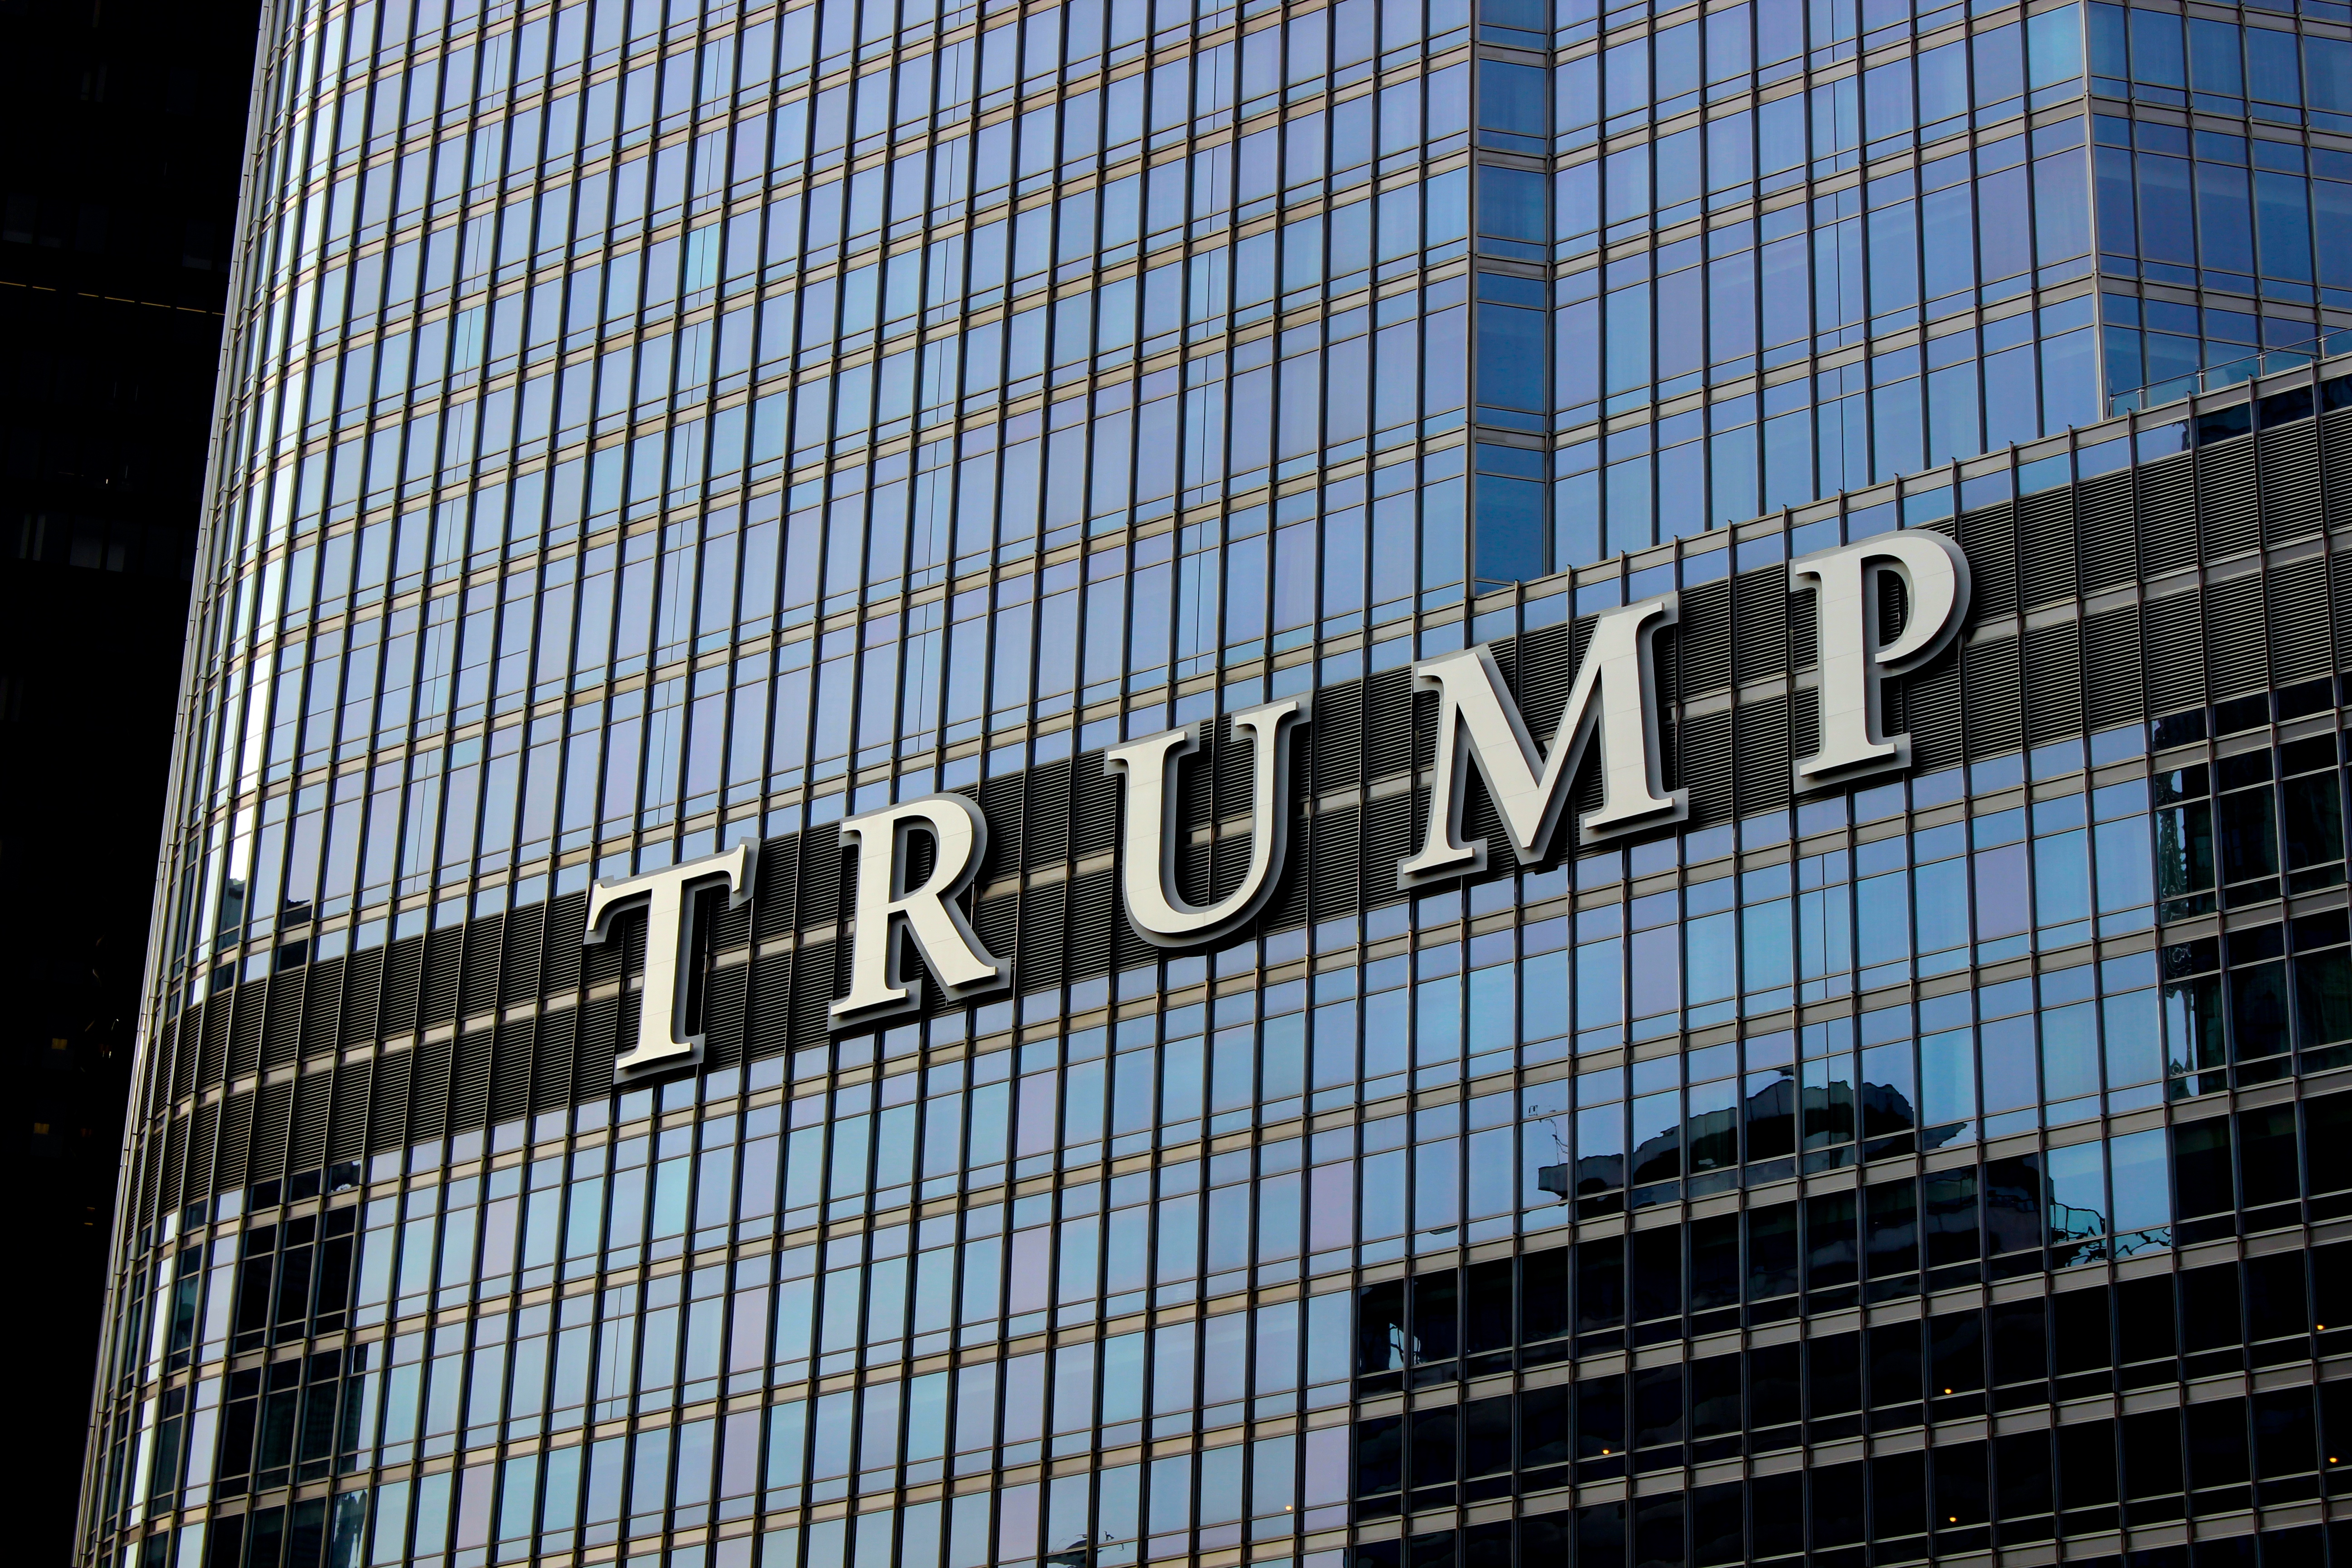 “Trump Tower” by Danny Huizinga is licensed under CC BY 2.0